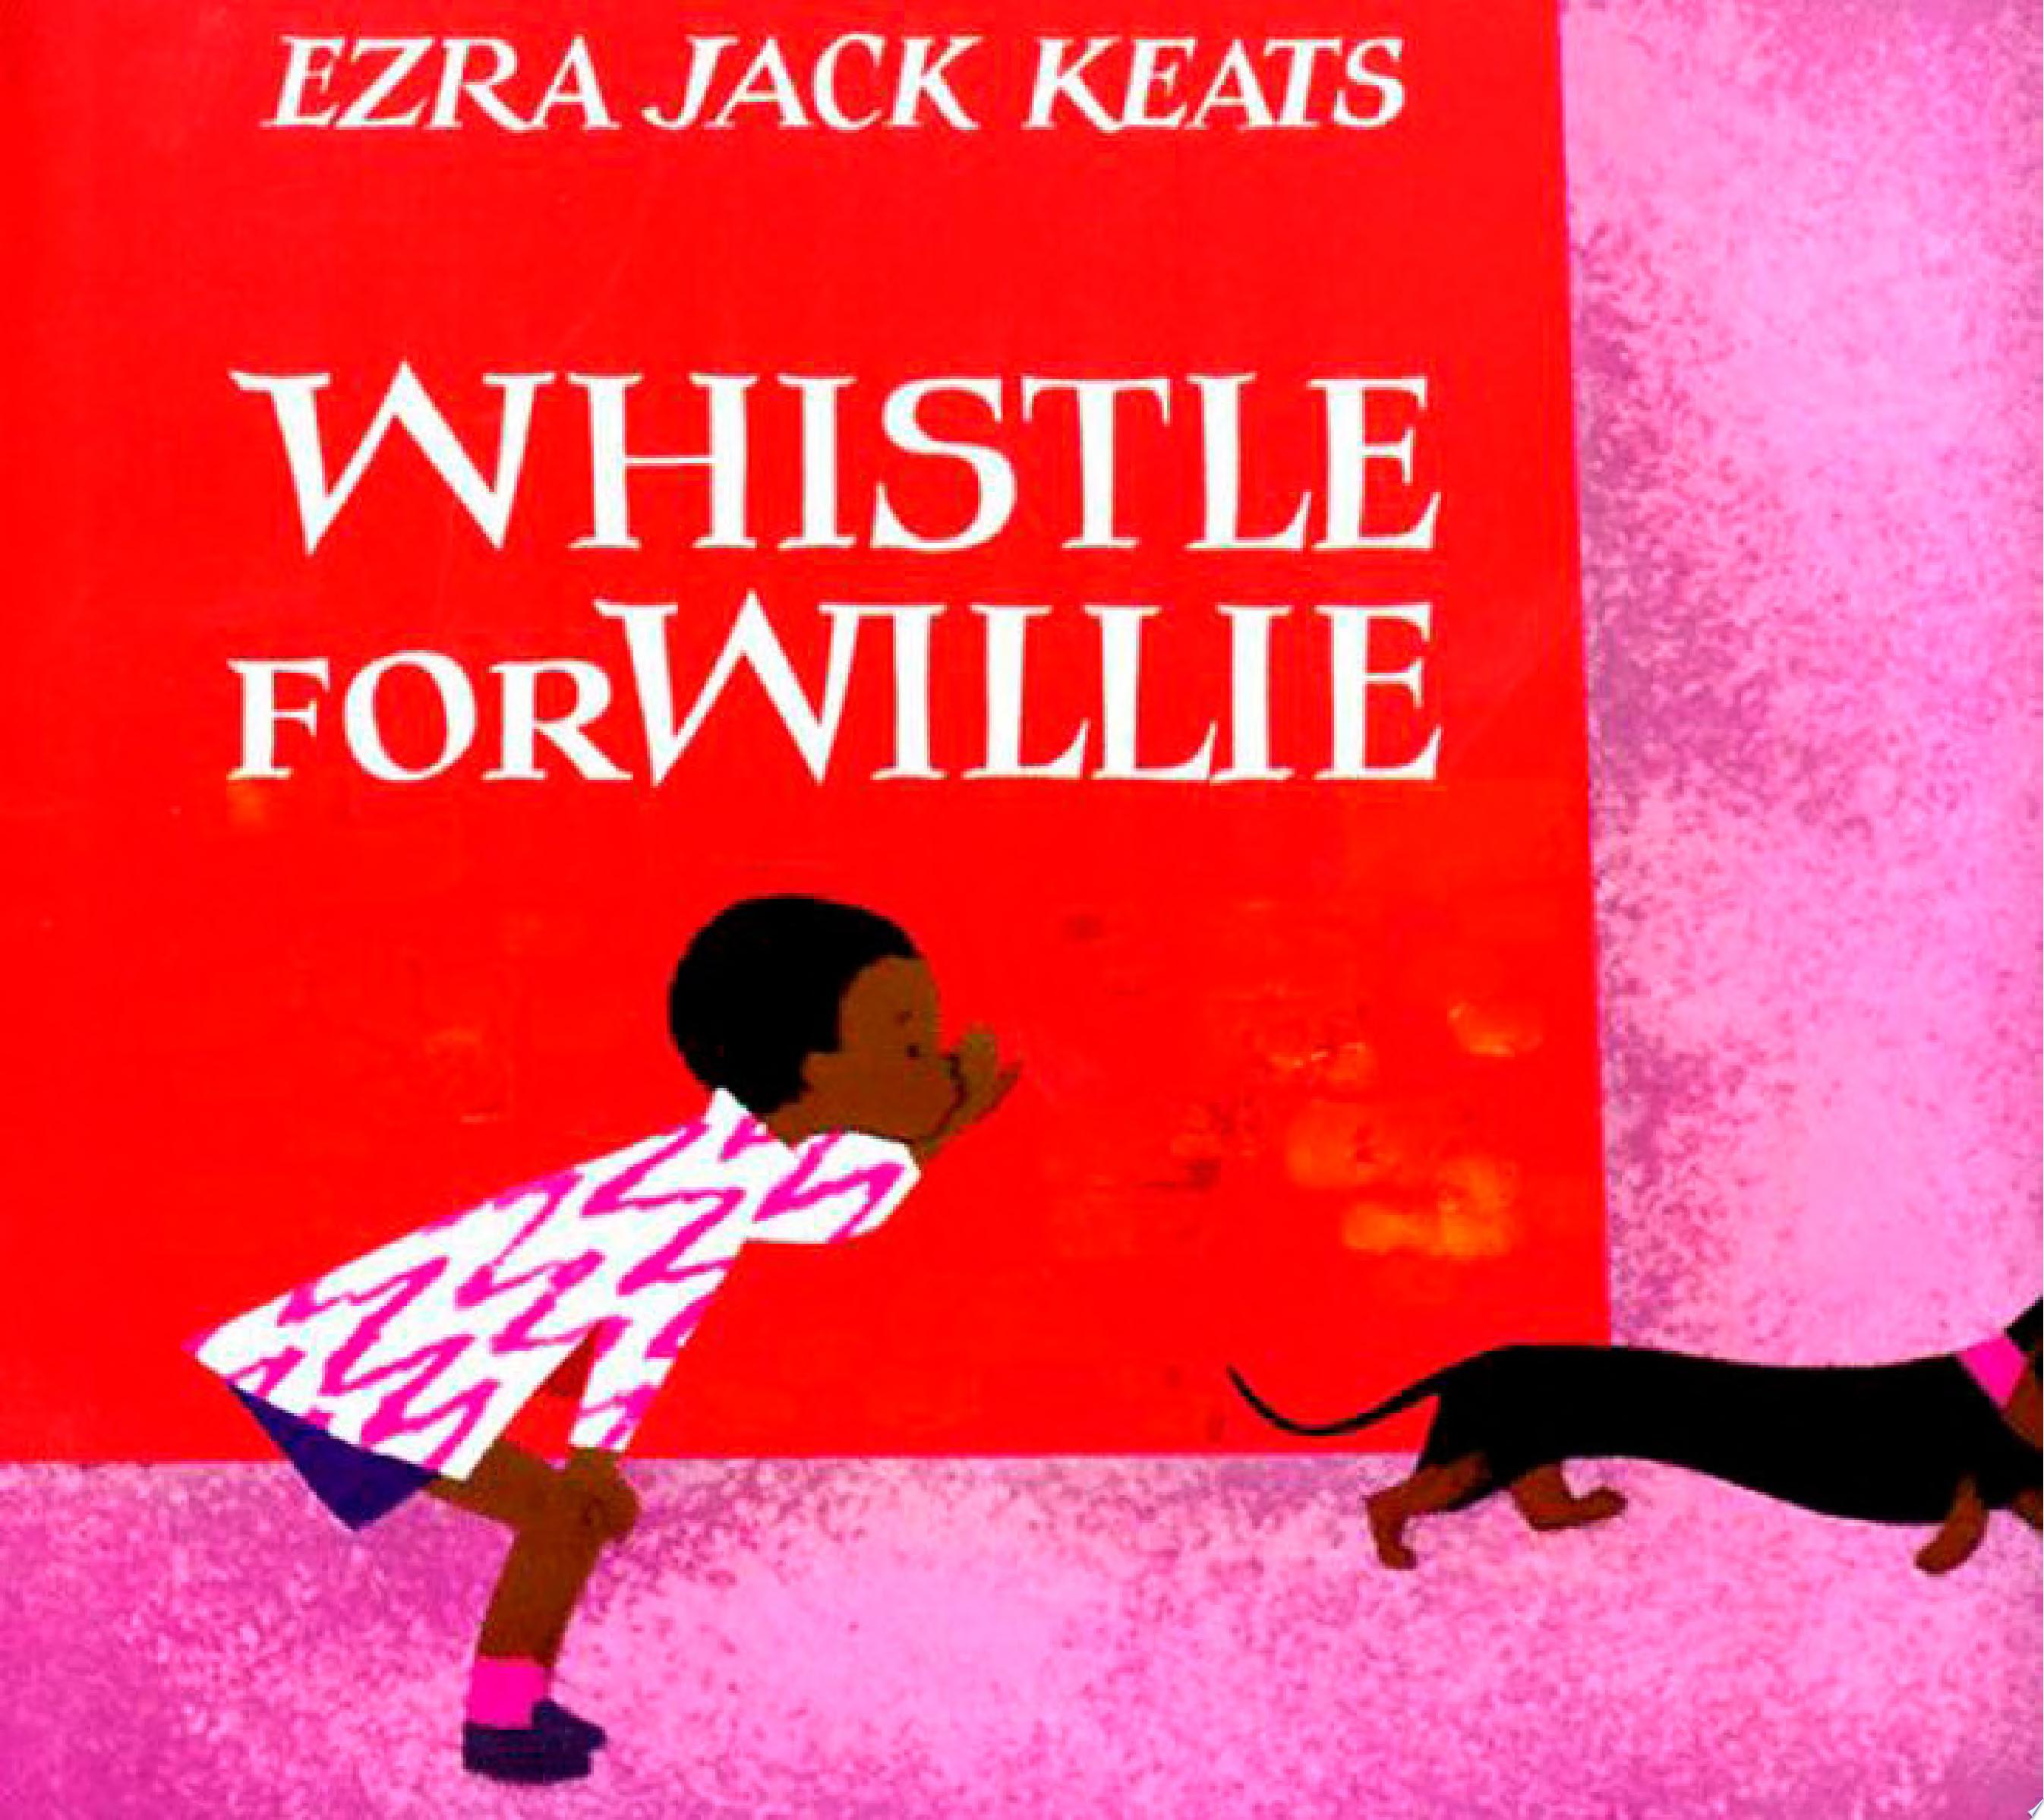 Image for "Whistle for Willie"